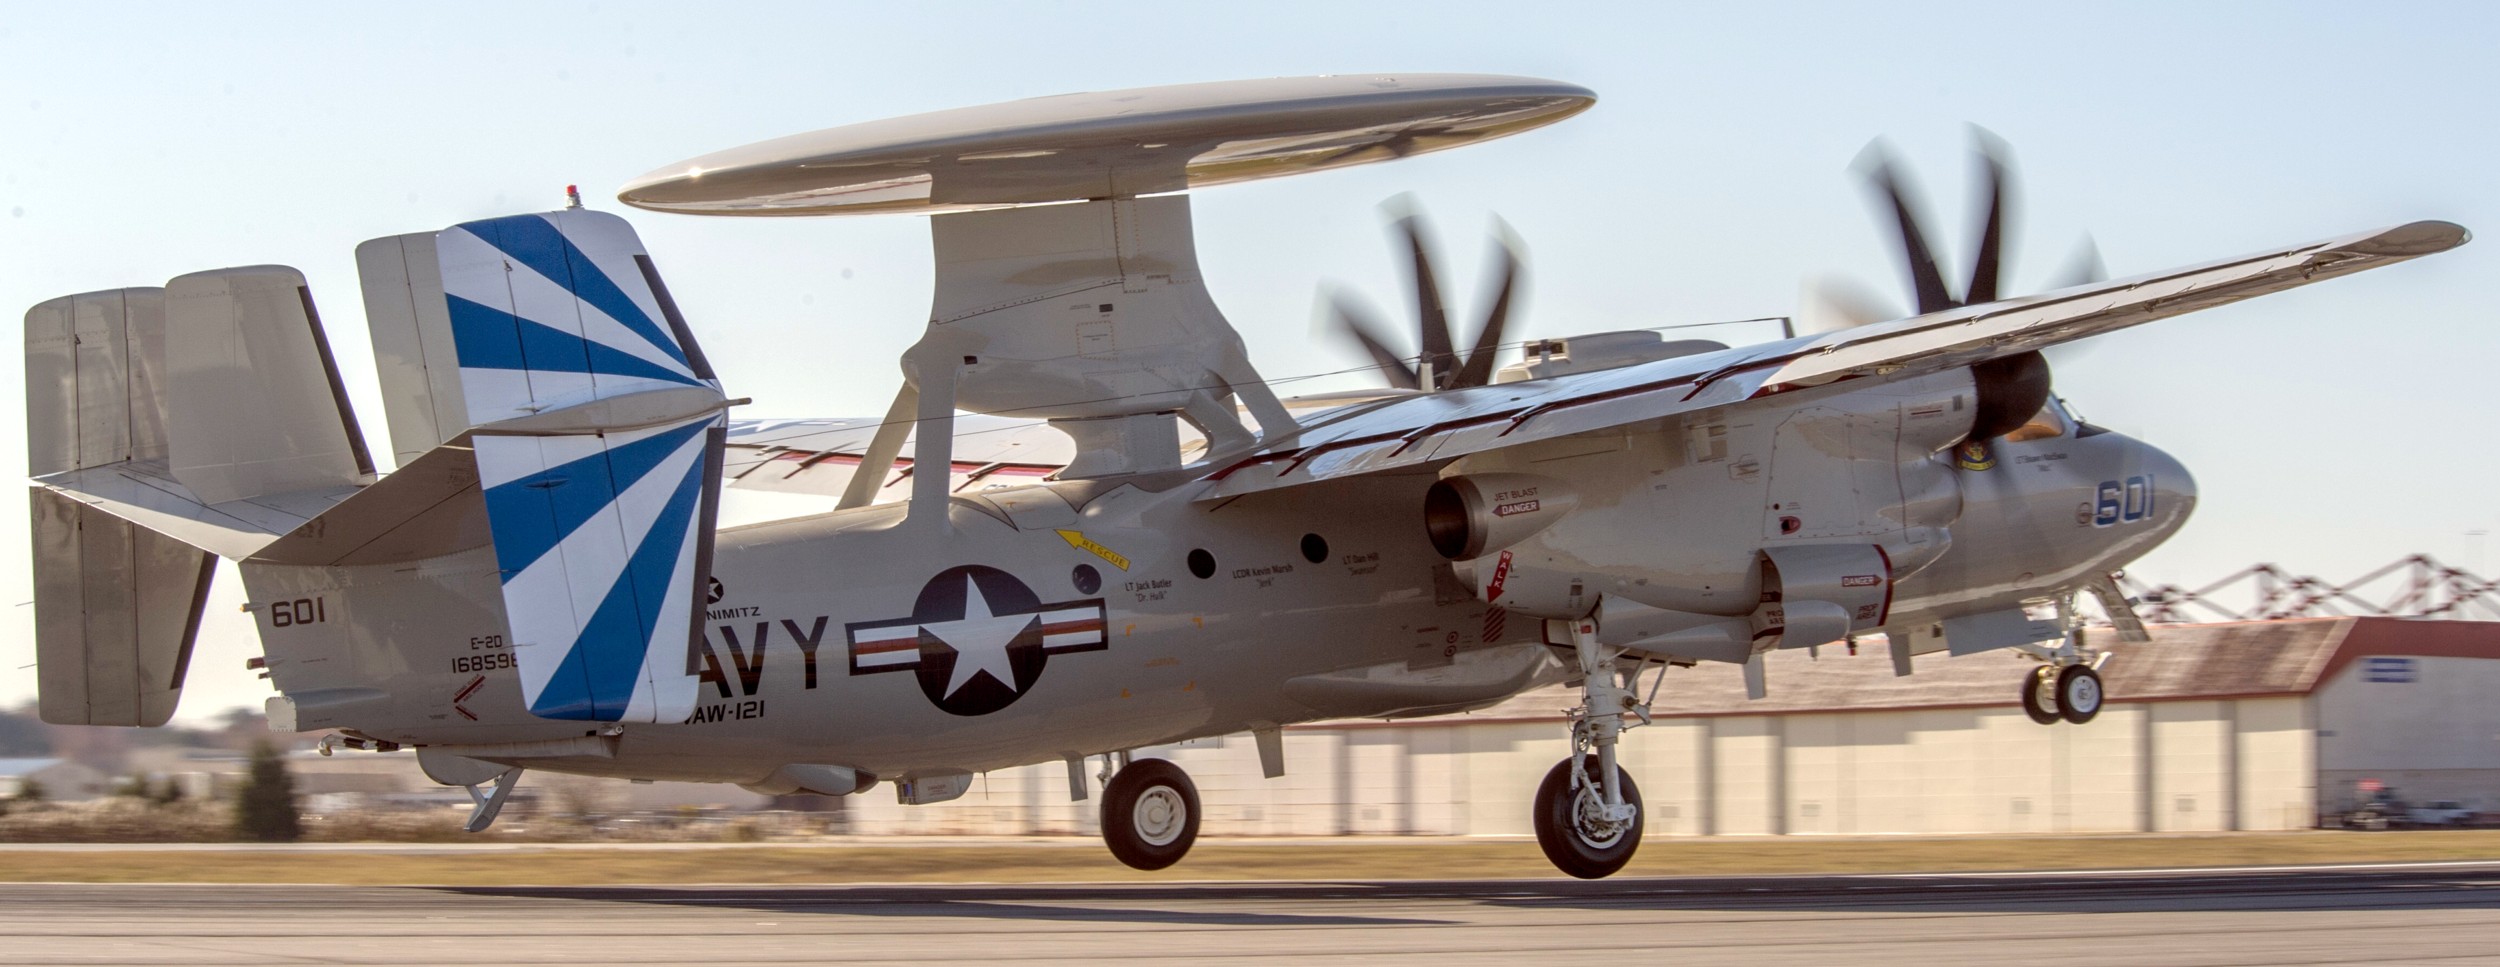 vaw-121 bluetails carrier airborne early warning squadron us navy e-2d advanced hawkeye nas norfolk virginia 37